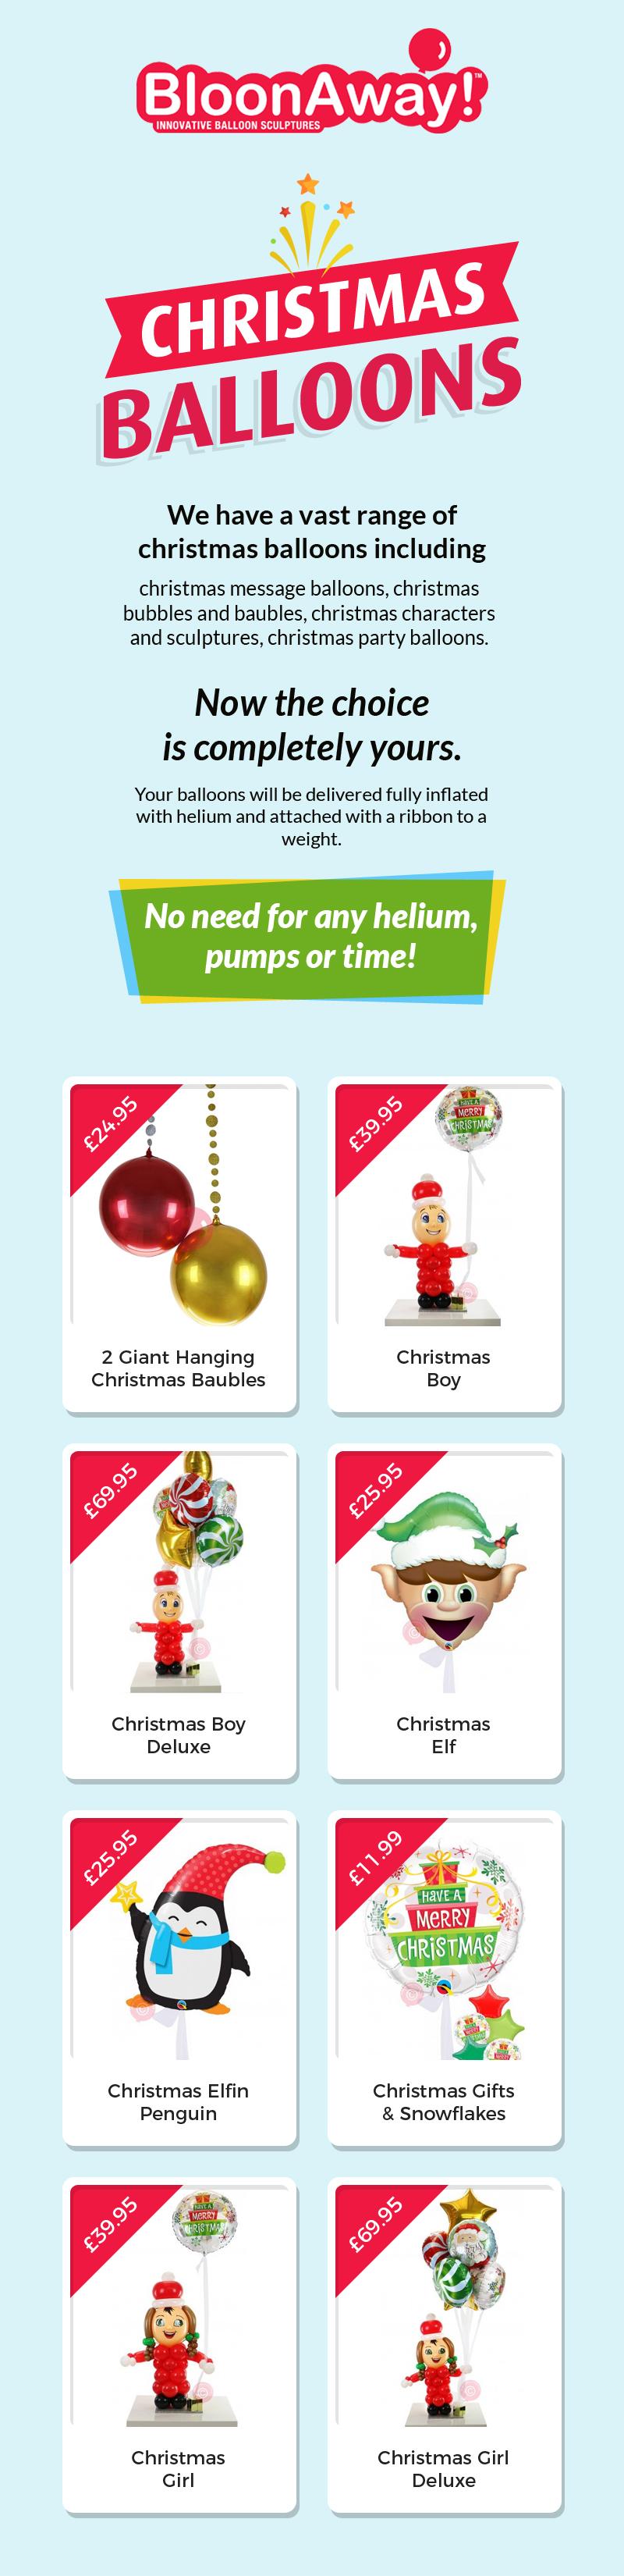 Shop for Christmas Balloons Online in UK from BloonAway